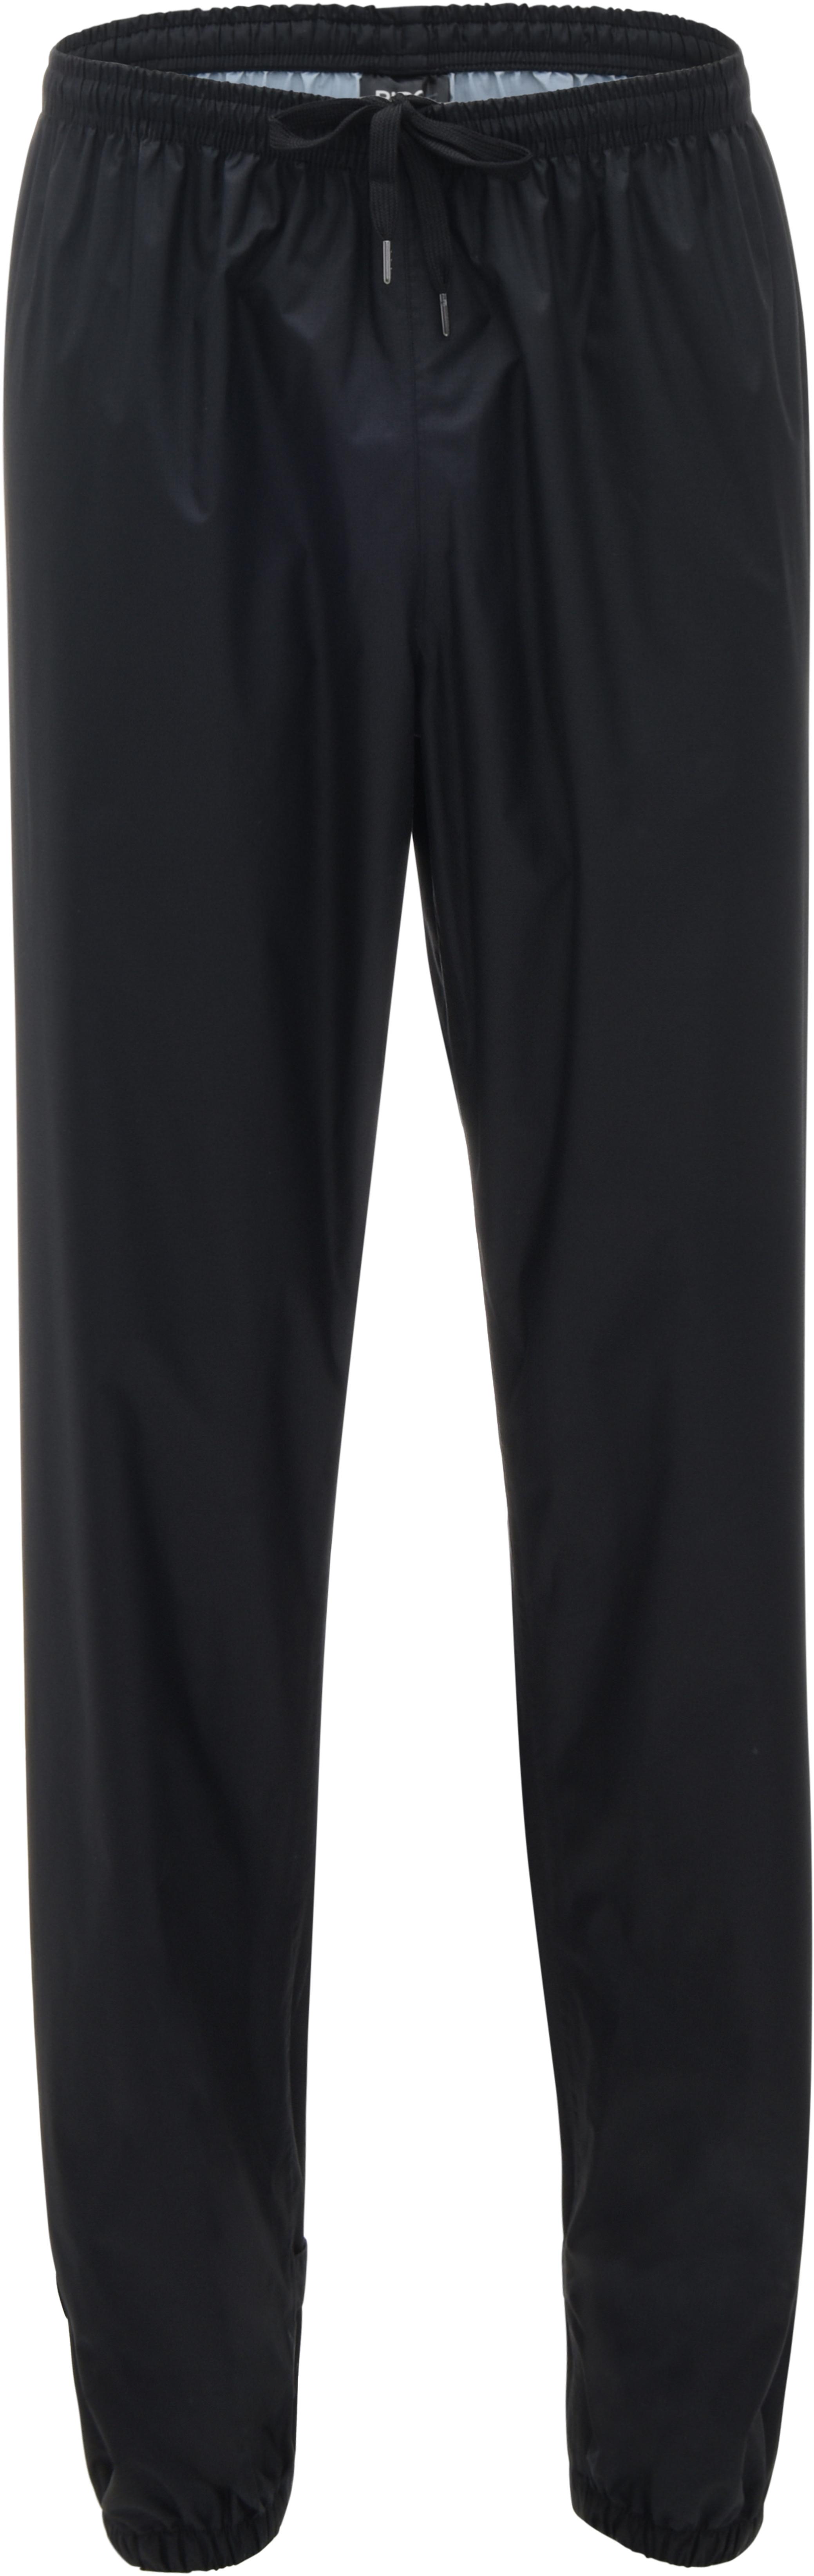 Ridge Mens Packable Cycling Overtrousers, Small